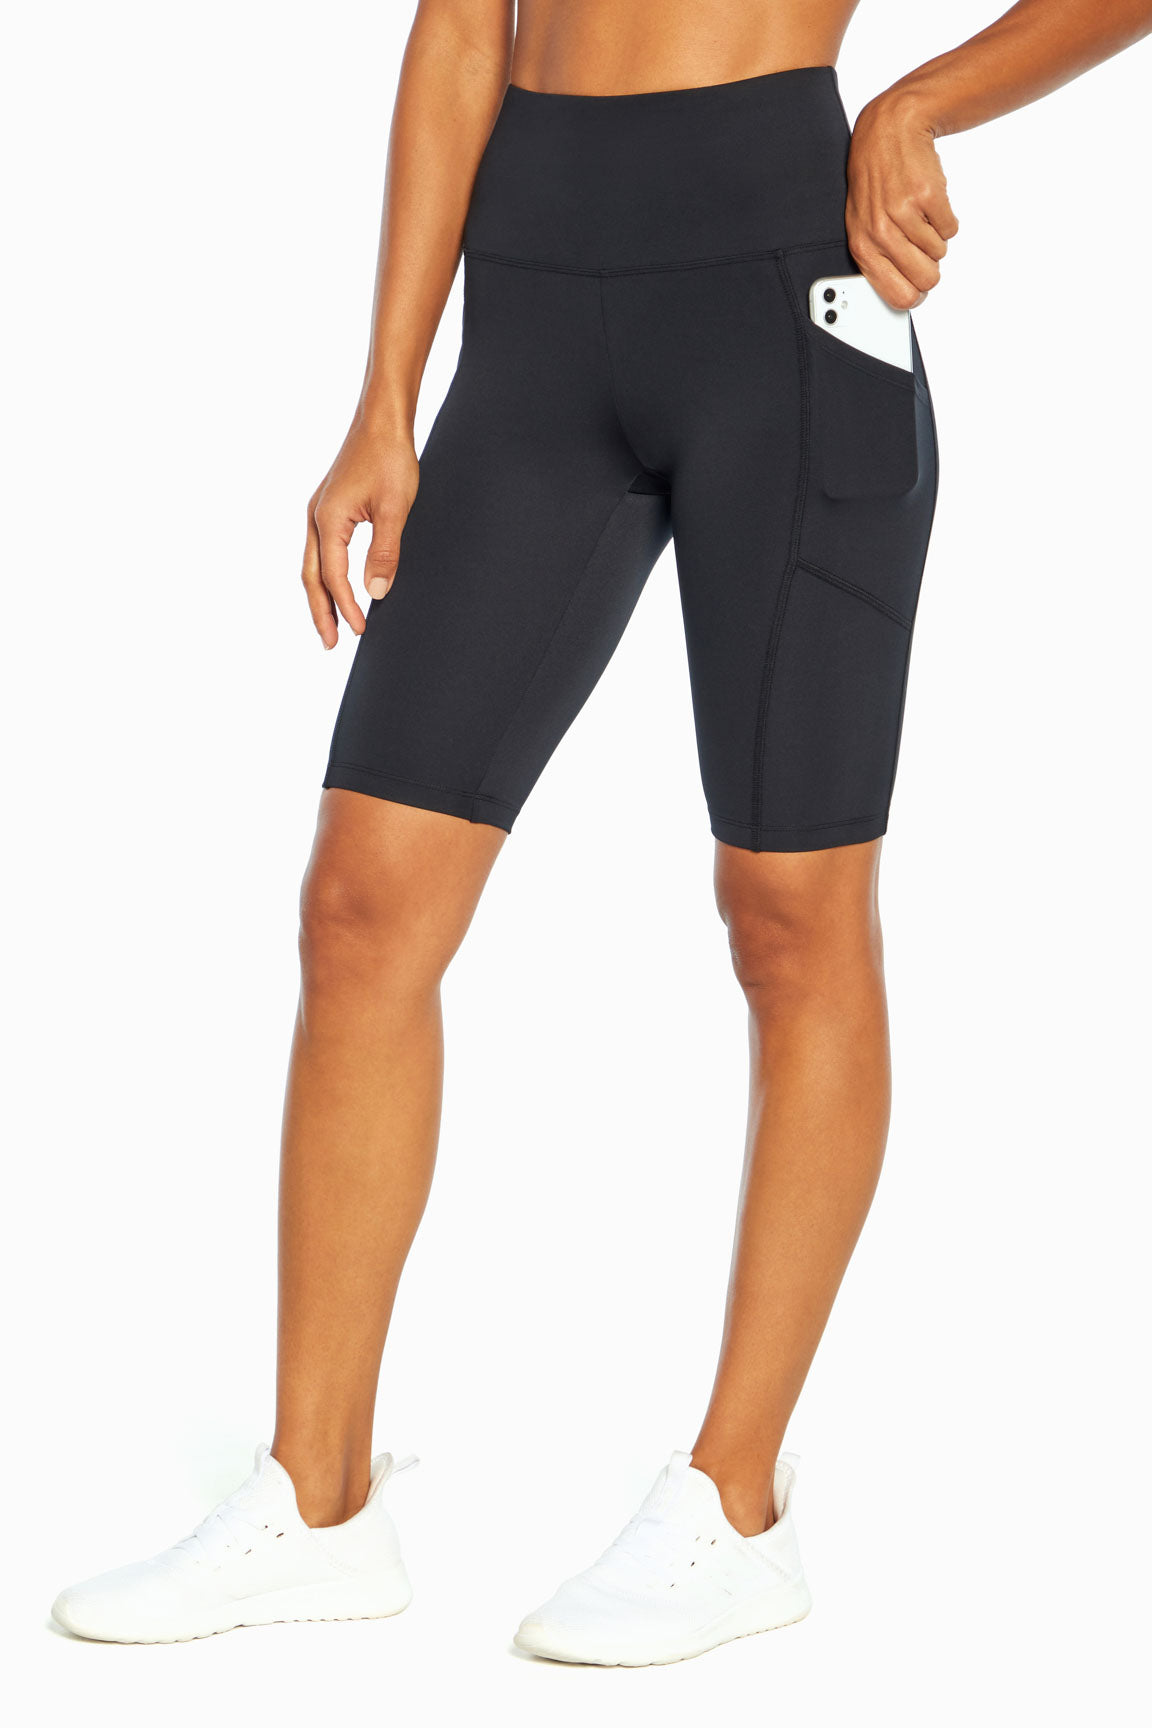 Bally Total Fitness Womens Activewear in Womens Activewear